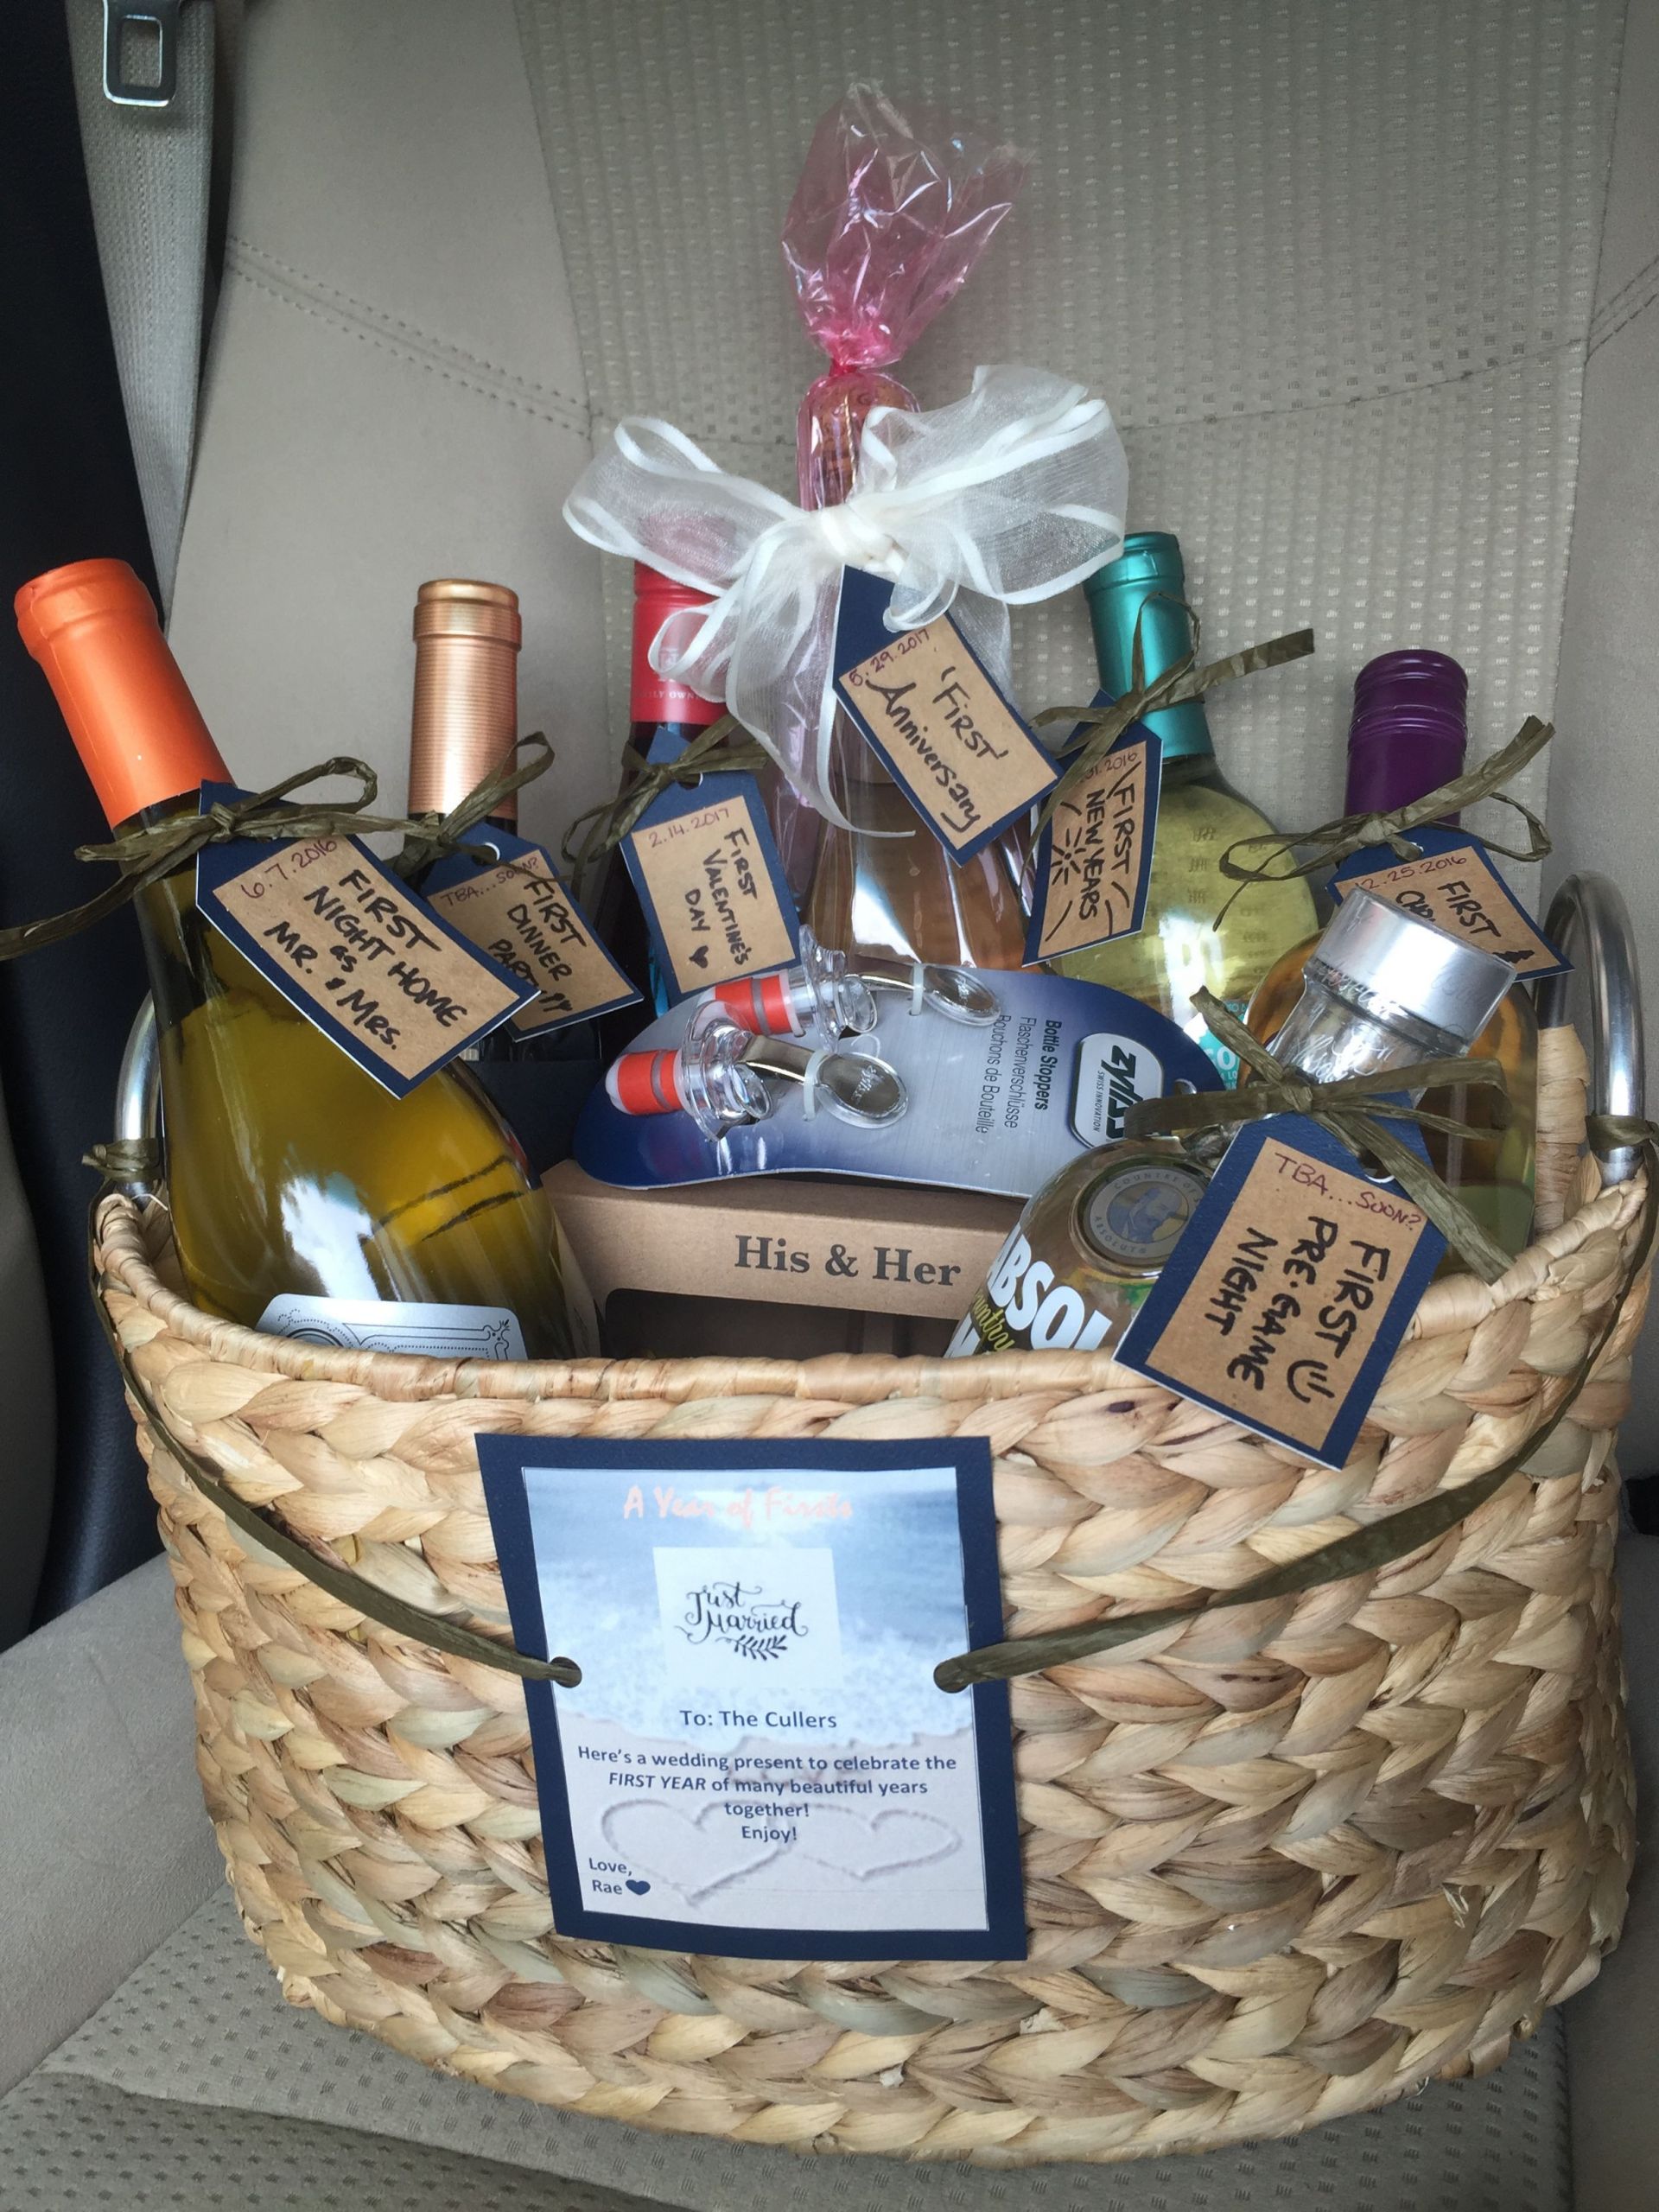 Couples Gift Basket Ideas
 A year of firsts The BEST and easiest wedding present for